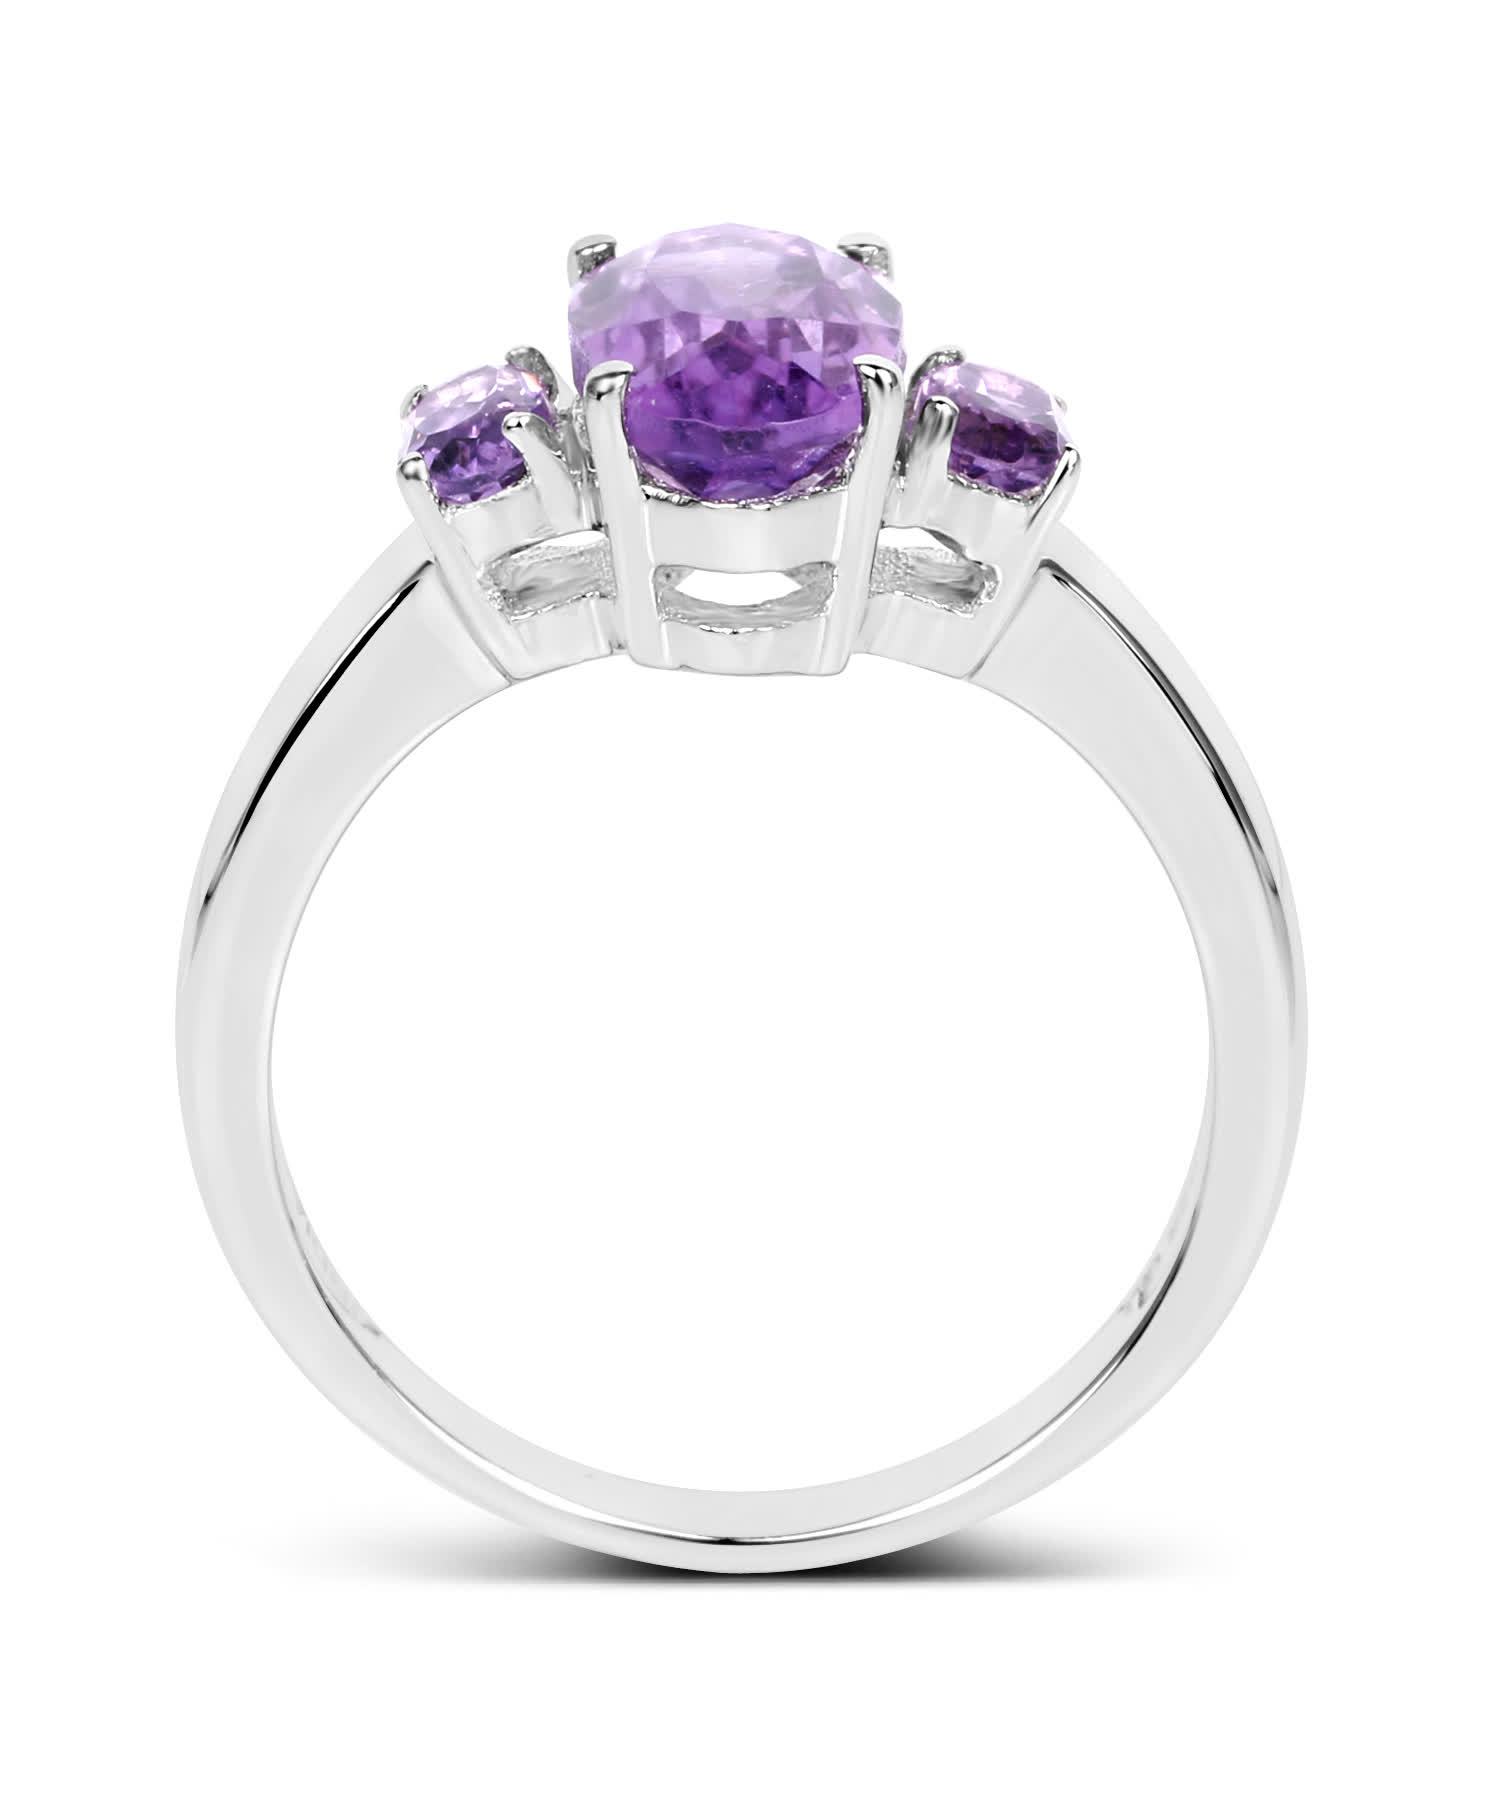 2.42ctw Natural Amethyst Rhodium Plated 925 Sterling Silver Three-Stone Ring View 2